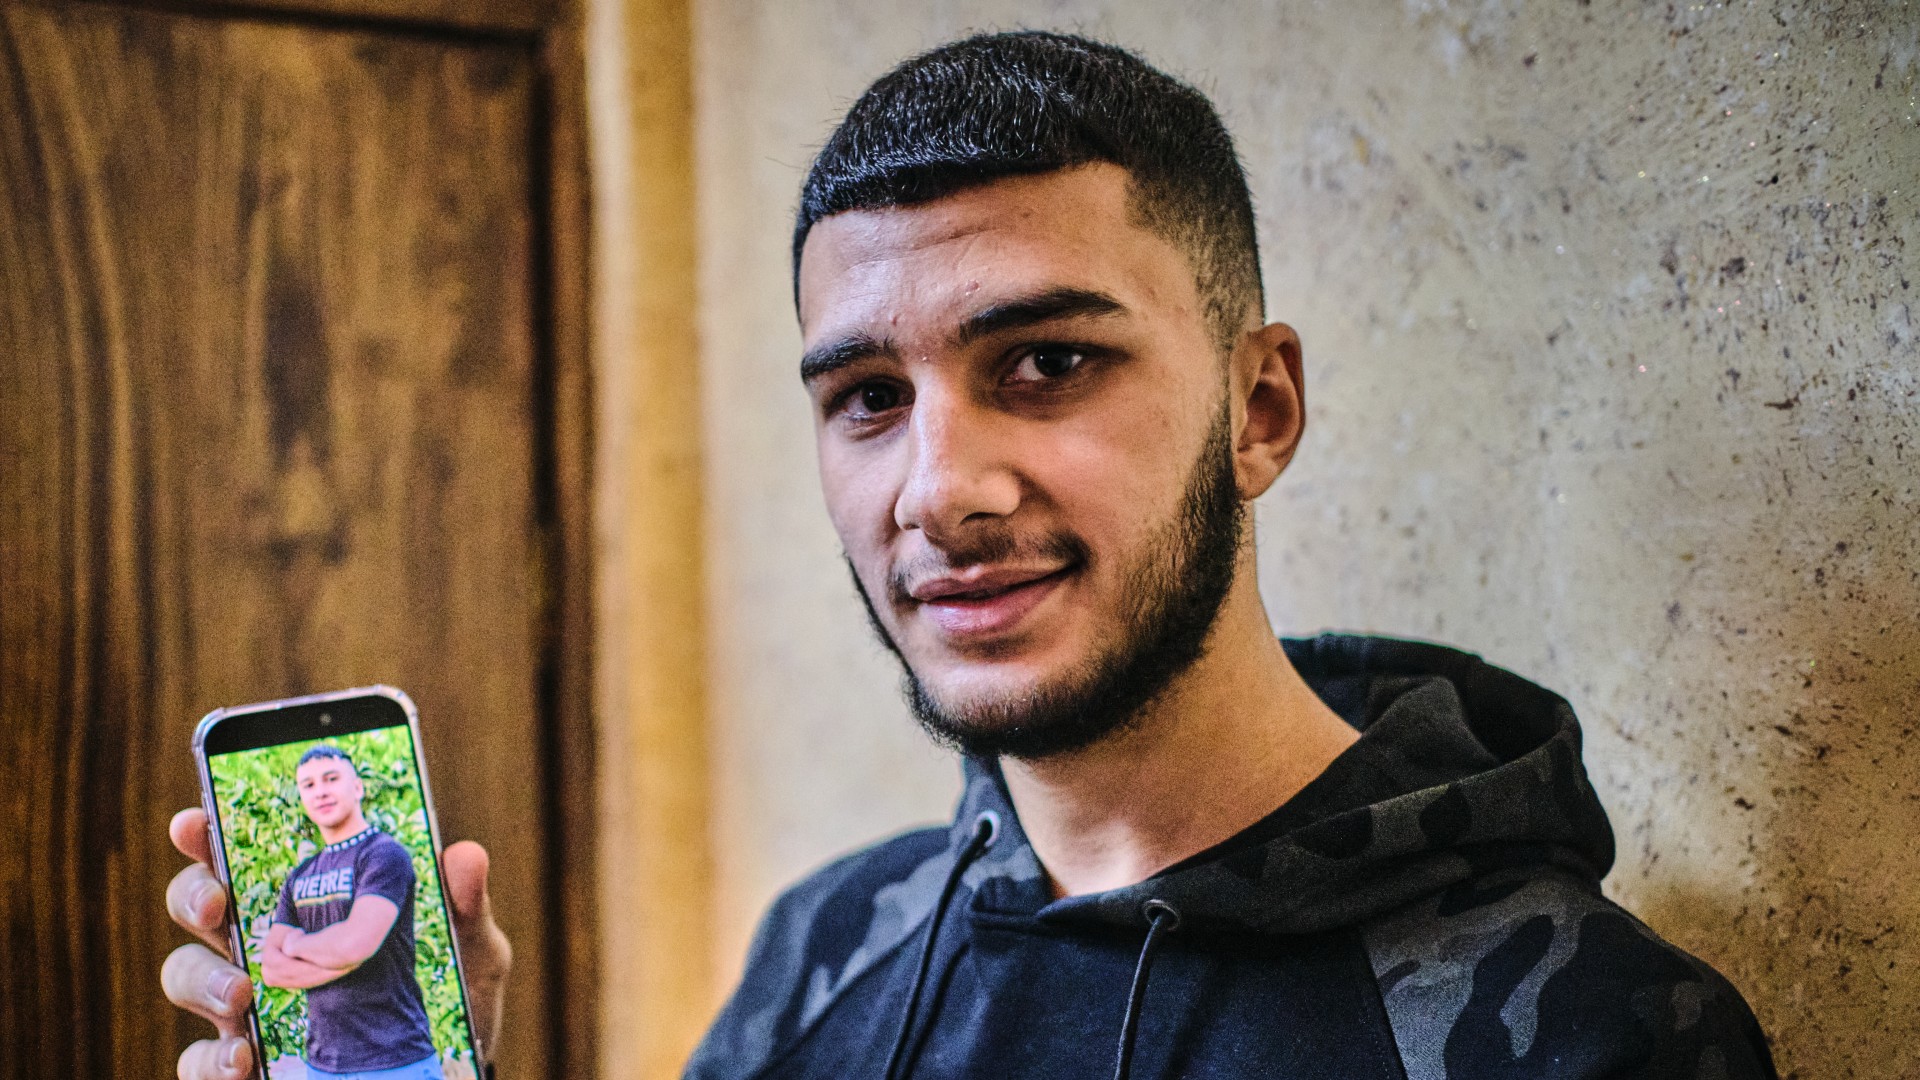 Wael Mesheh, 17, spent 14 months in Israeli prison. He holds up a photo of him looking much larger before his arrest (MEE/Angelo Calianno)